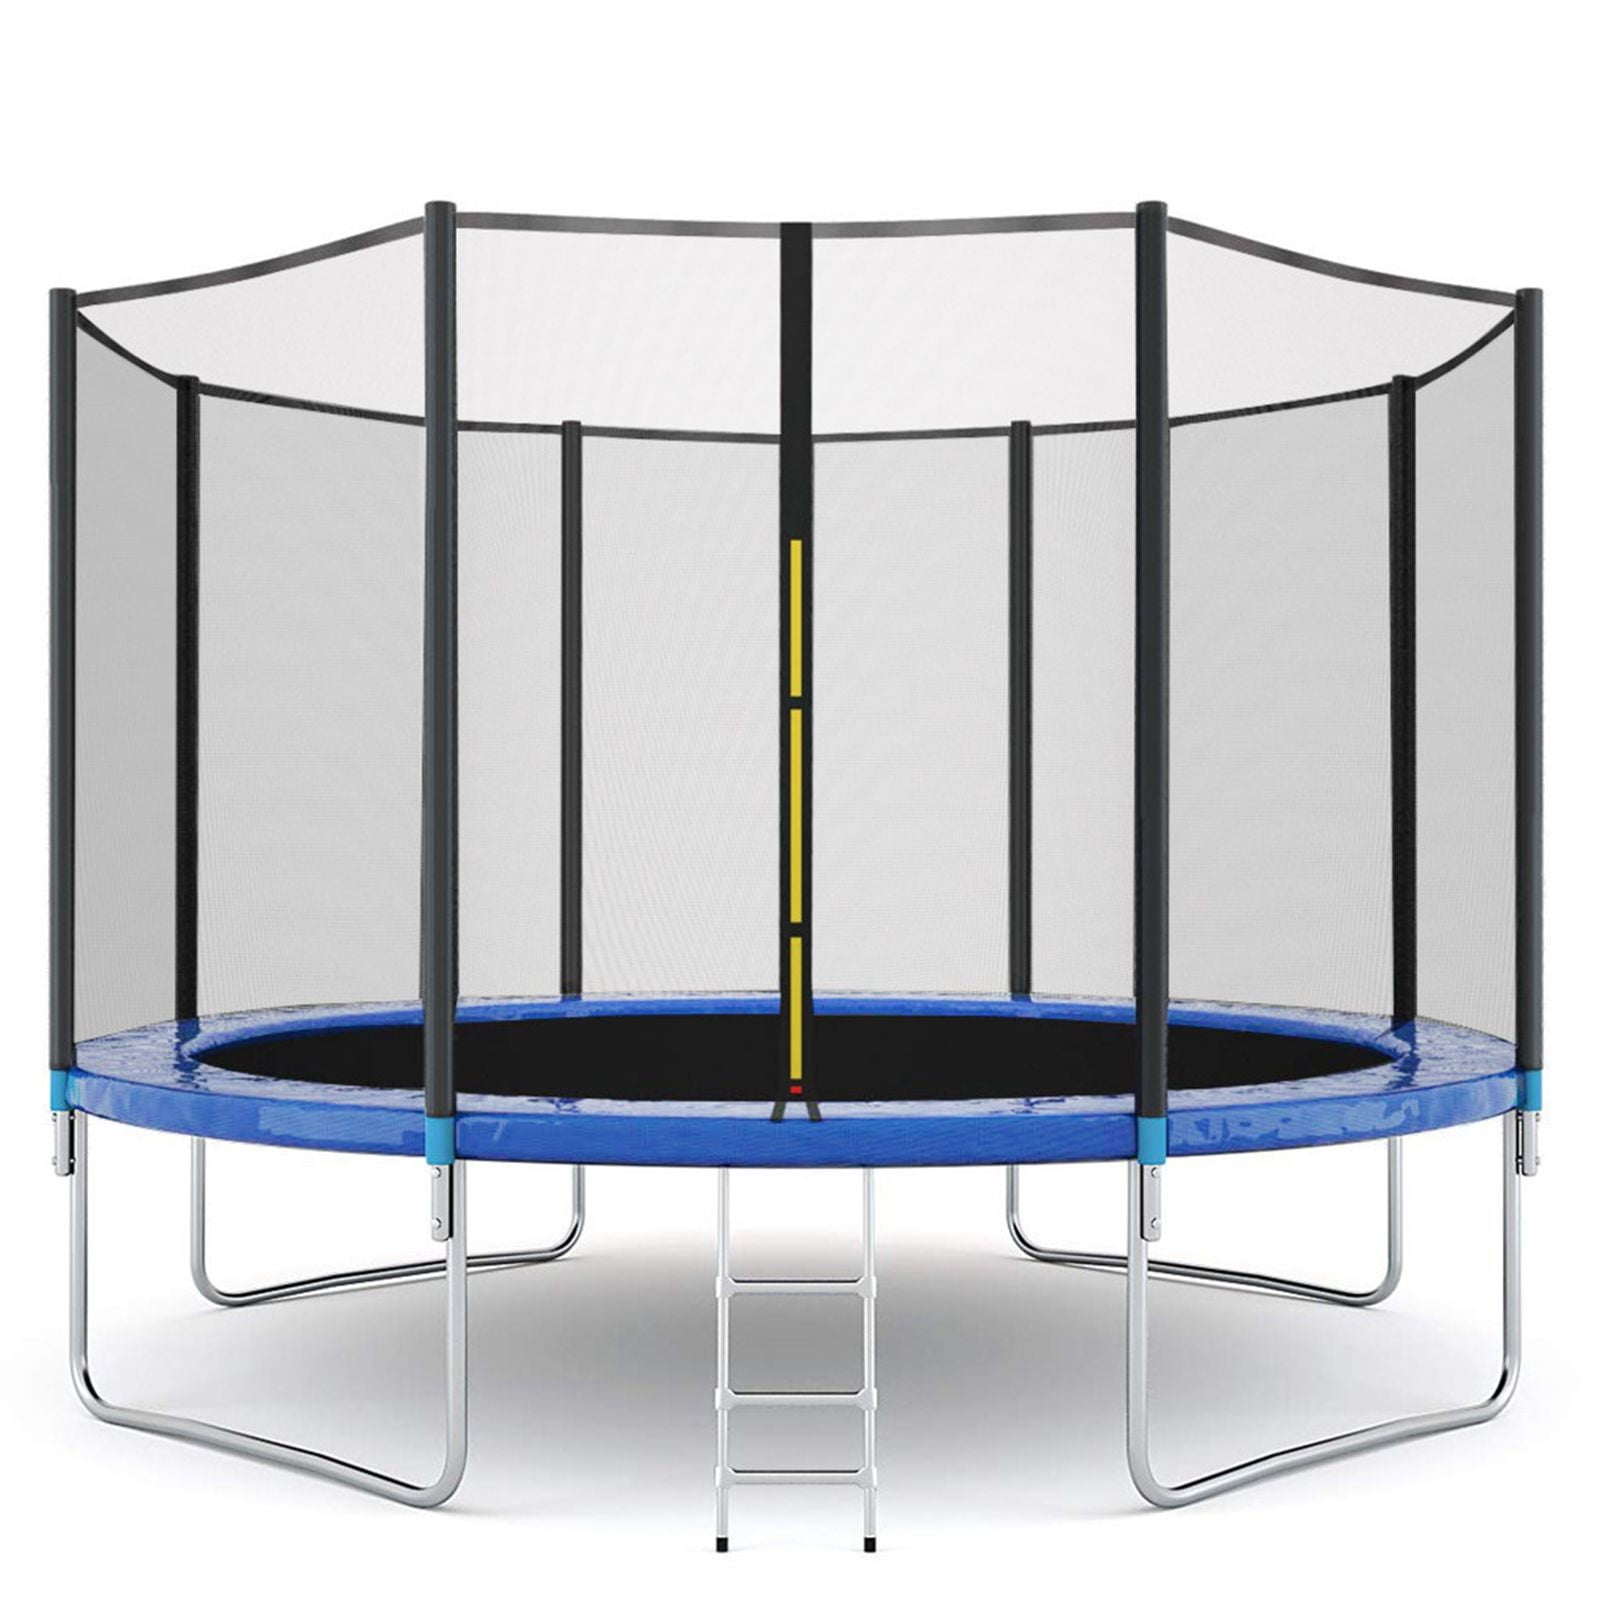 Sokhug 12ft Round Kids Trampoline  with Enclosure Net,600LB Weight Limit,Backyard Trampolines with Non-Slip Ladder,Blue